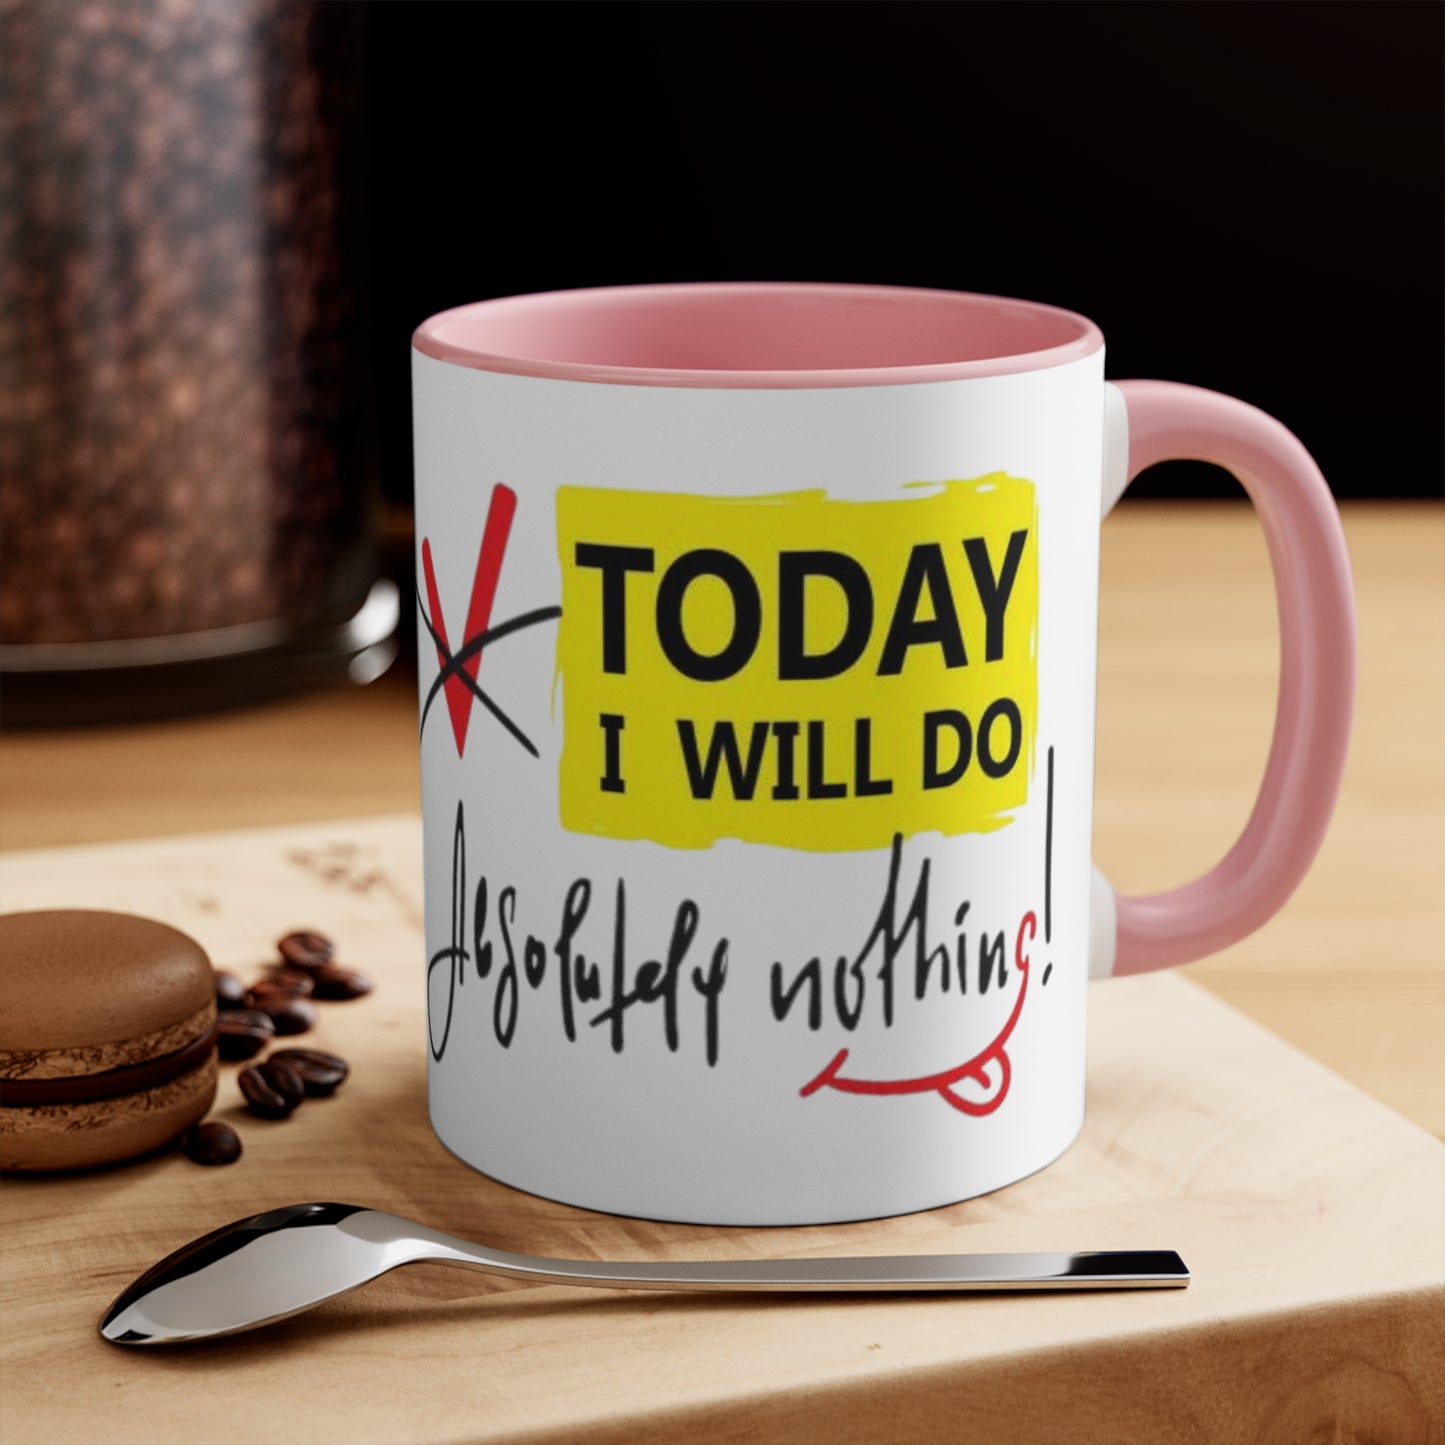 Today I Will Do Absolutely Nothing Ceramic Coffee Mug, teacher gift, coworker gift, unique gift, gift for mom, gift for dad, funny mug